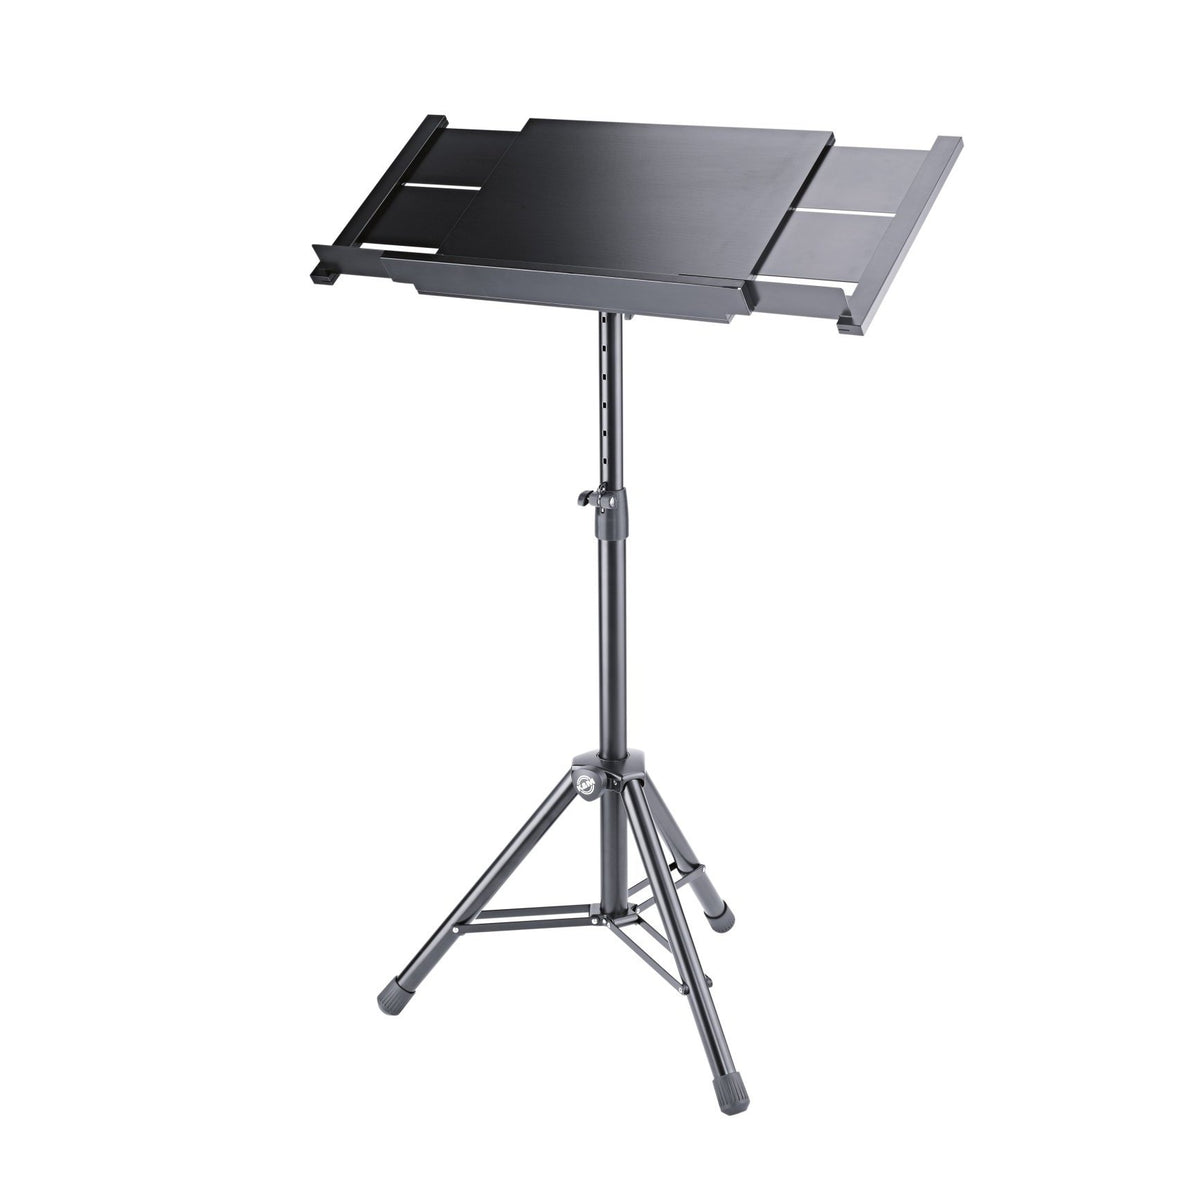 KÃ¶nig &amp; Meyer - 12338 Orchestra Conductor Stand Desk-Music Stand-KÃ¶nig &amp; Meyer-Music Elements